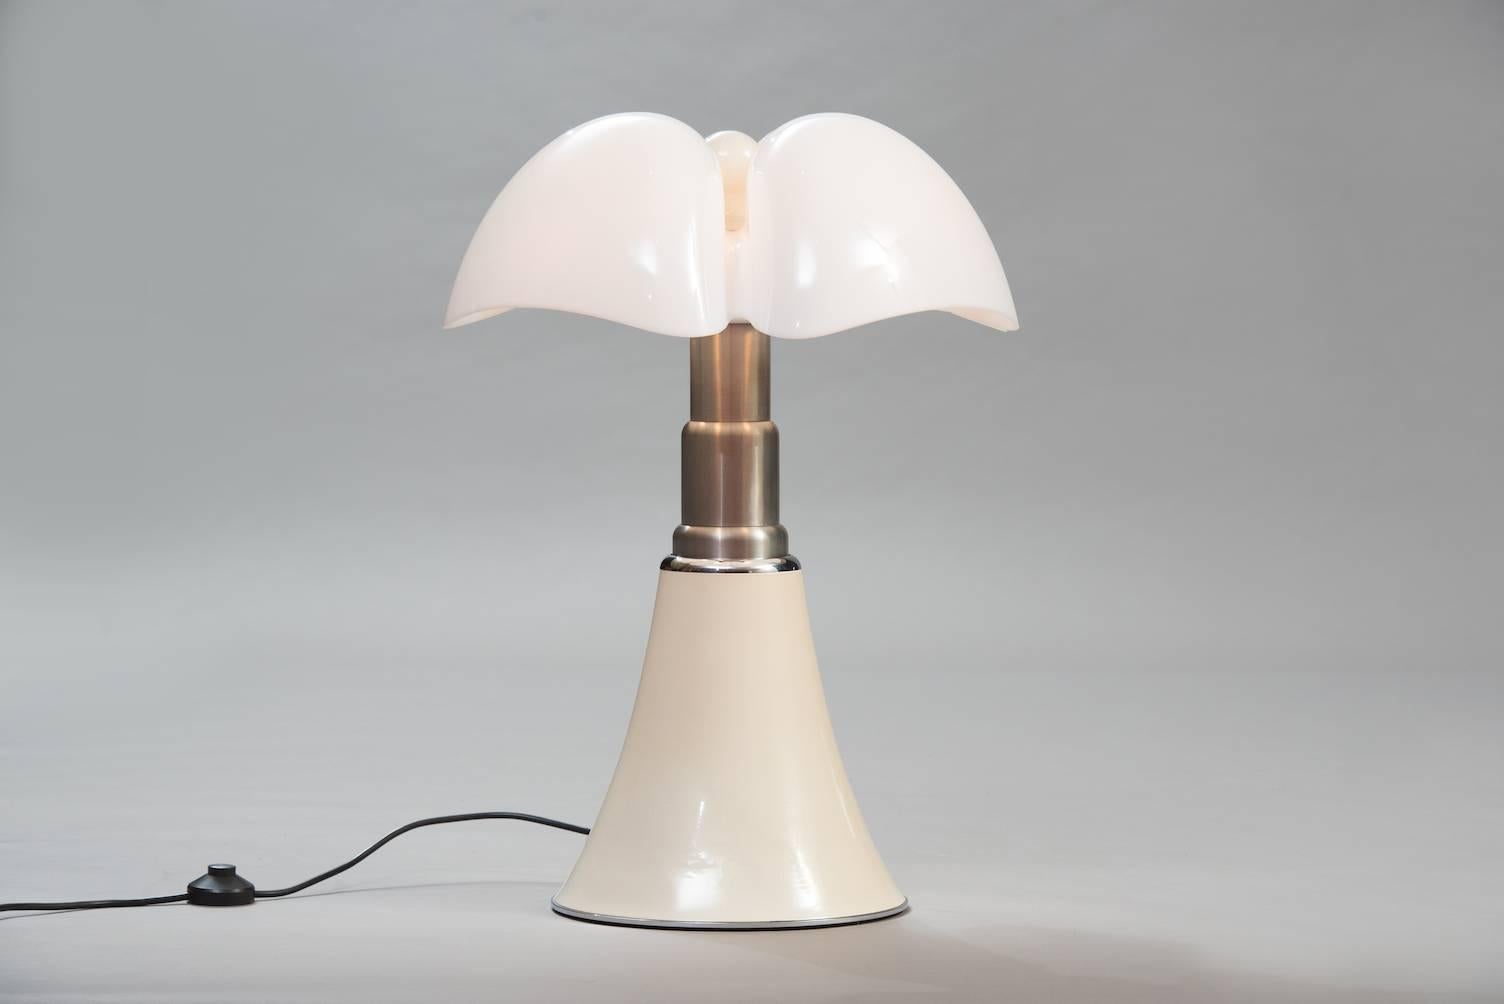 The “Pipistrello” lamp gets its name from the similarity the shape of the light diffuser has to bat wings, the painted steel base supports an adjustable height neck and four-sided white plastic diffuser.
Measure: H 88 cm (max) 70 cm (min), D 50 cm.